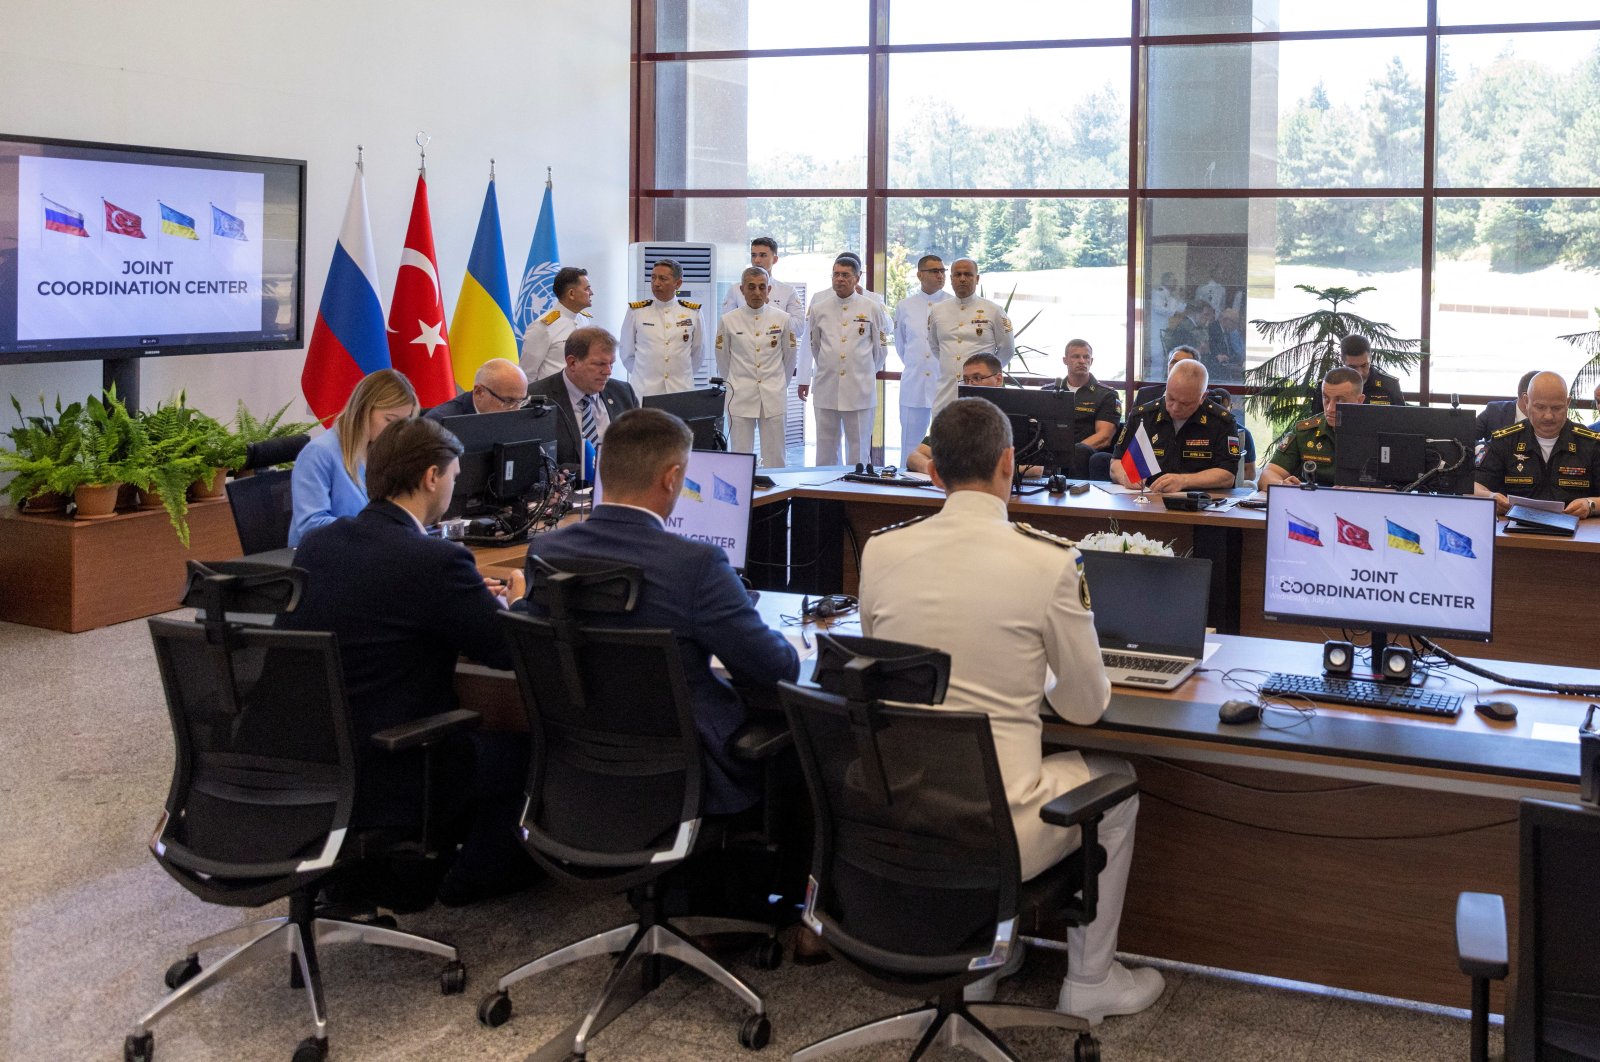 Military officers from Russia, Ukraine, Turkey and members of delegations from both countries and U.N. attend the opening ceremony of a joint coordination centre (JCC) that will oversee a U.N.-brokered deal to re-open Ukrainian grain exports in the Black Sea, in Istanbul, Turkey, July 27, 2022. REUTERS/Umit Bektas